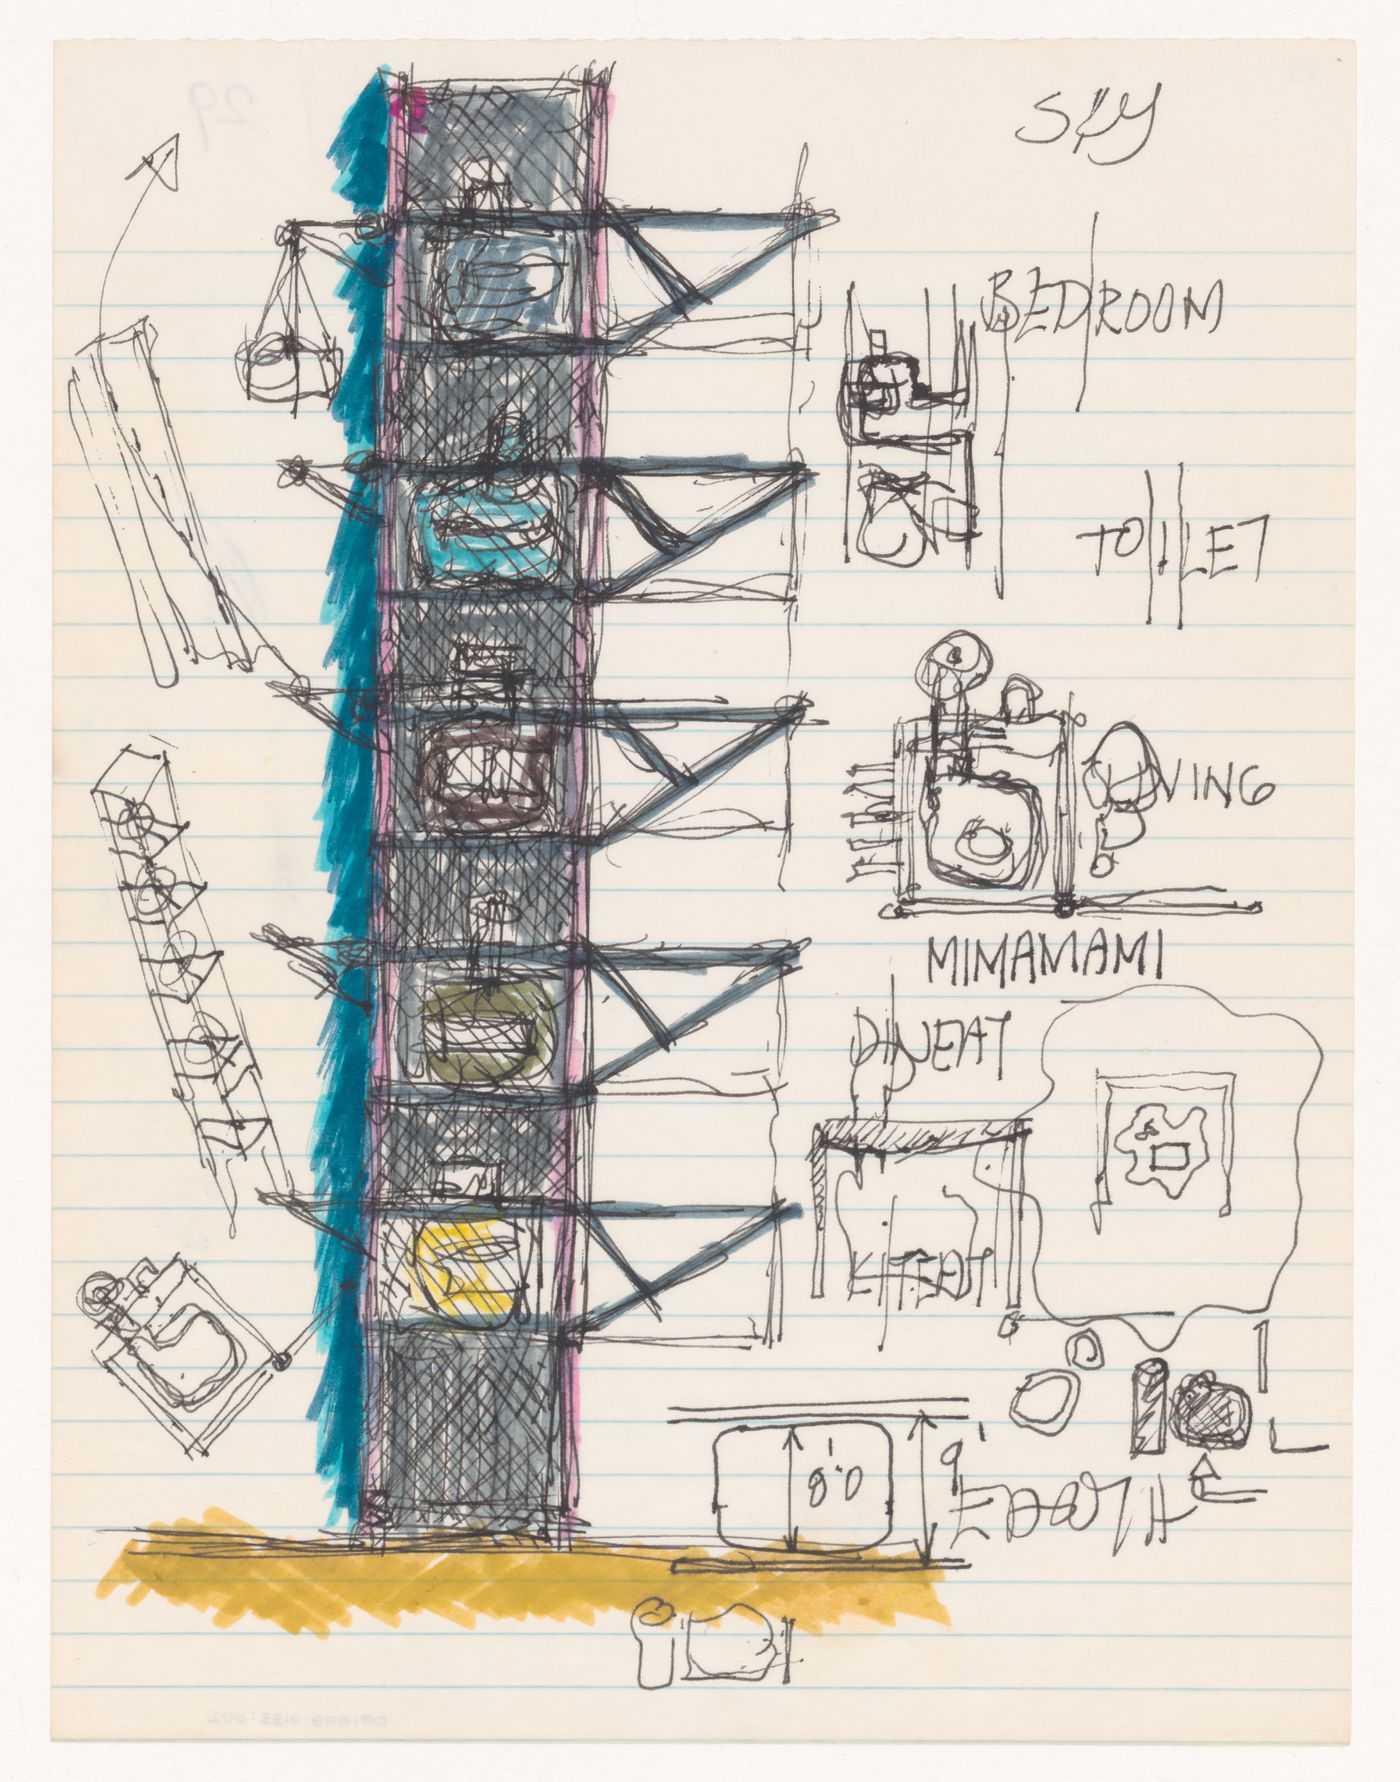 Sketches with annotations for Campagna House